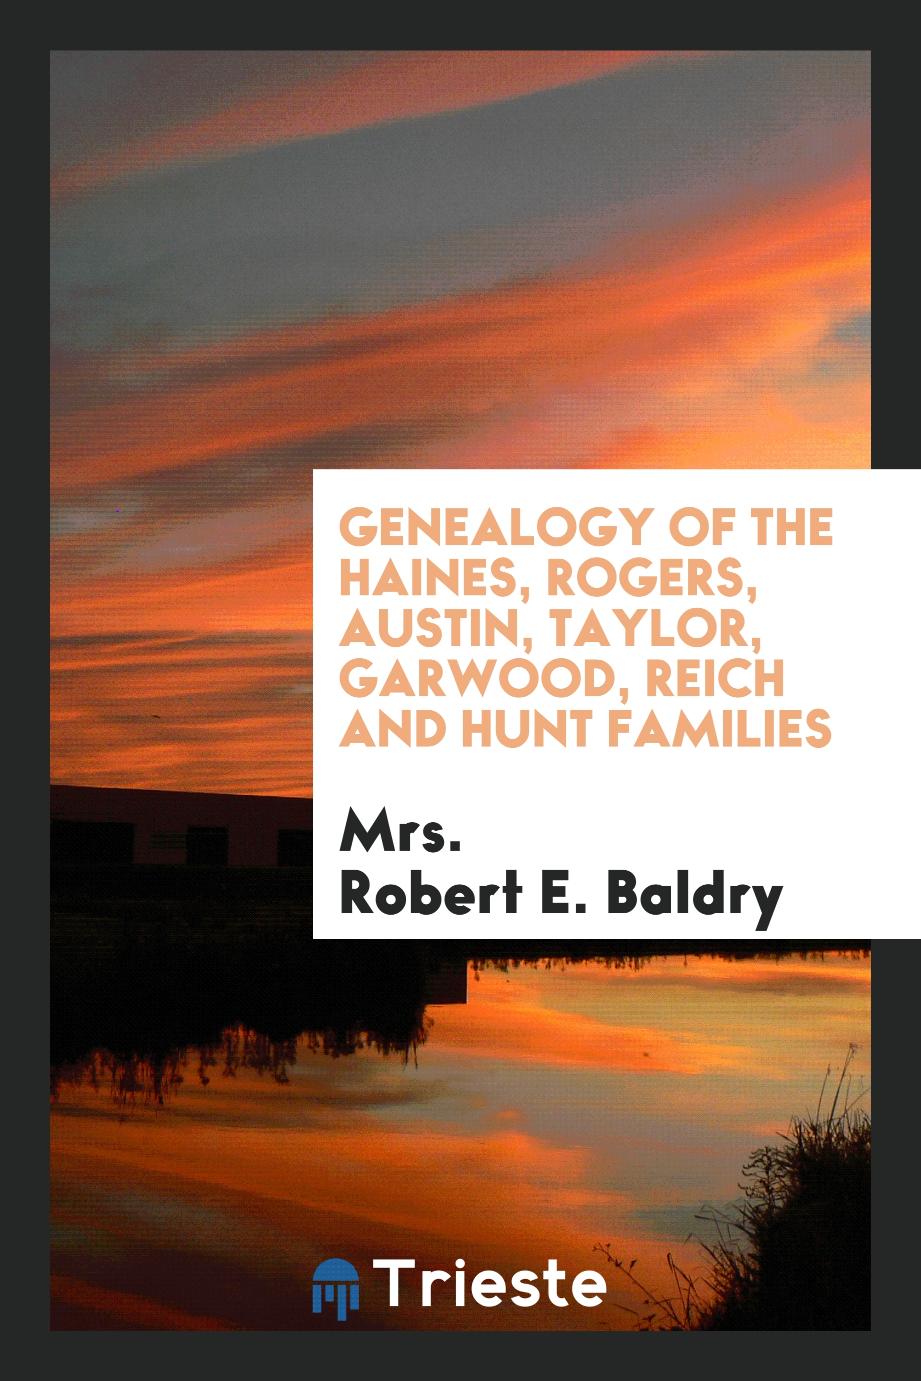 Genealogy of the Haines, Rogers, Austin, Taylor, Garwood, Reich and Hunt Families